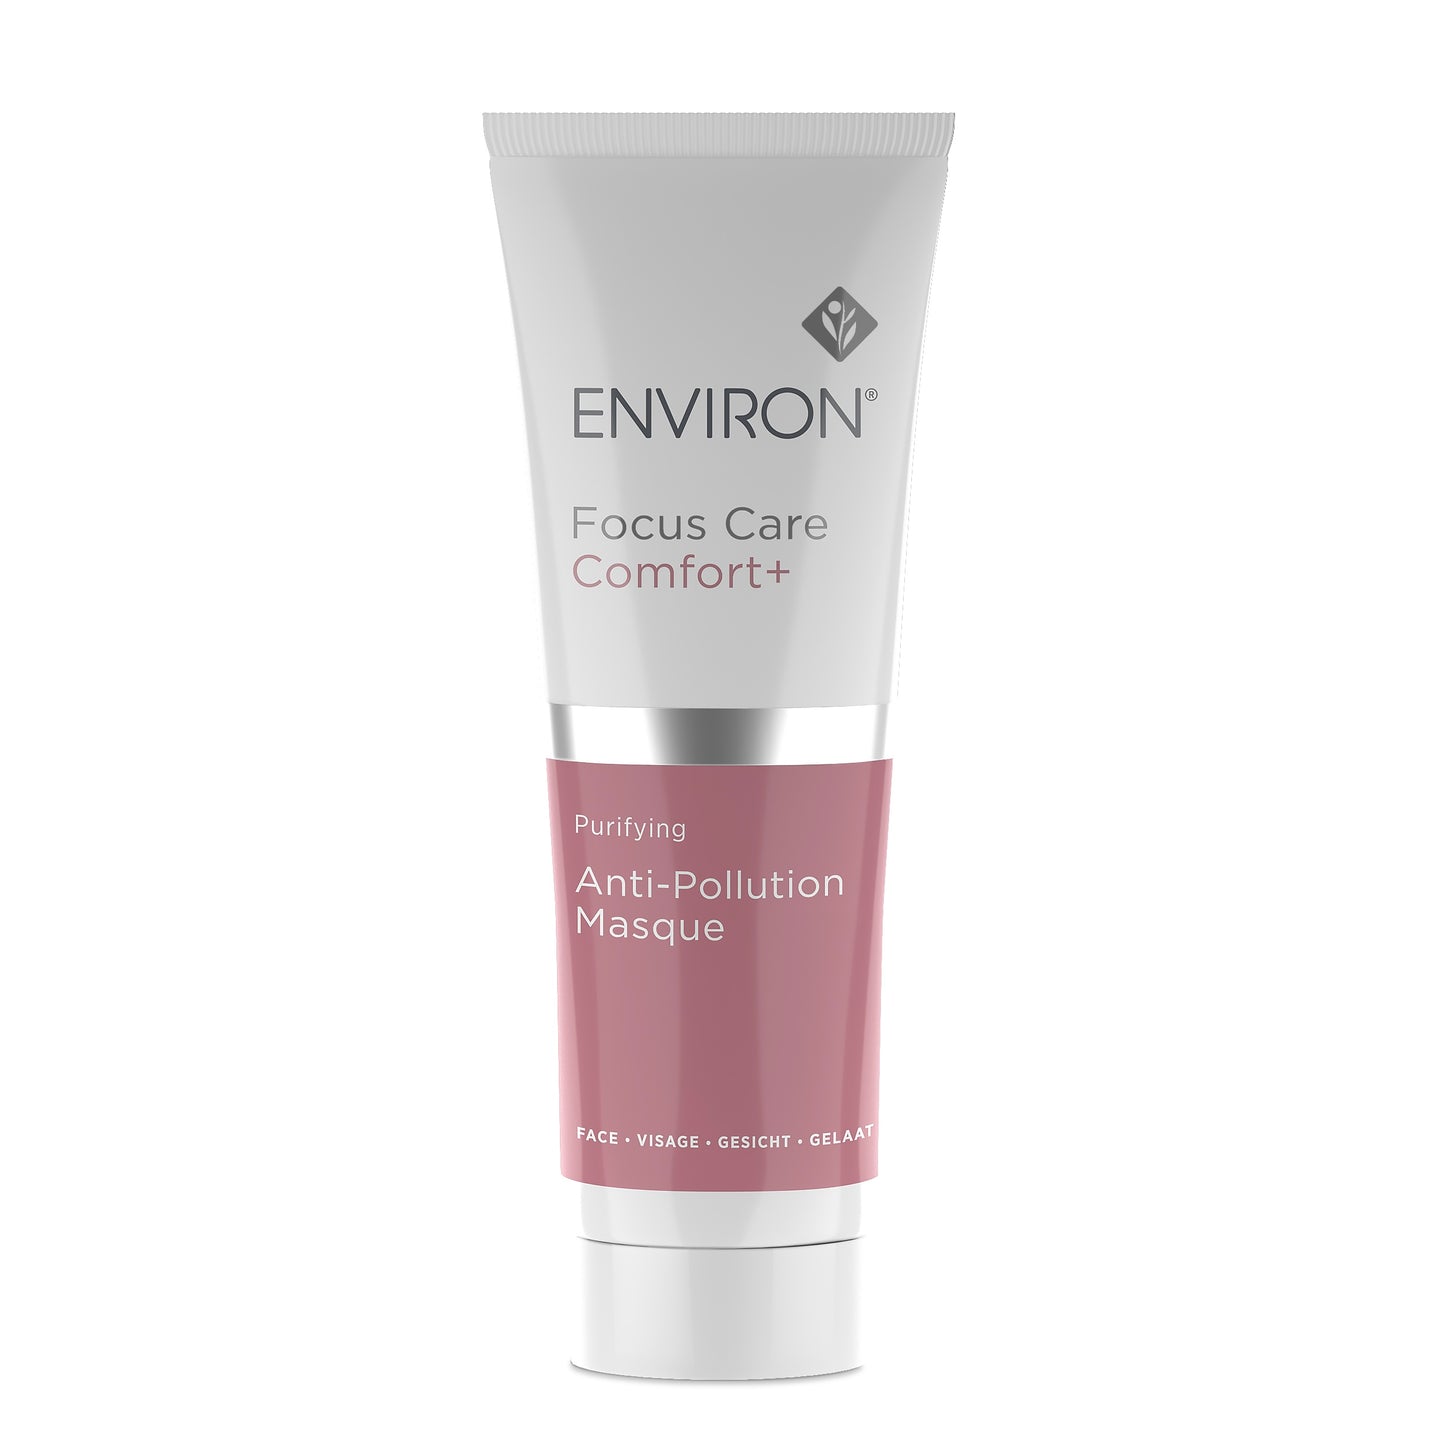 Purifying anti-pollution masque - 75ml